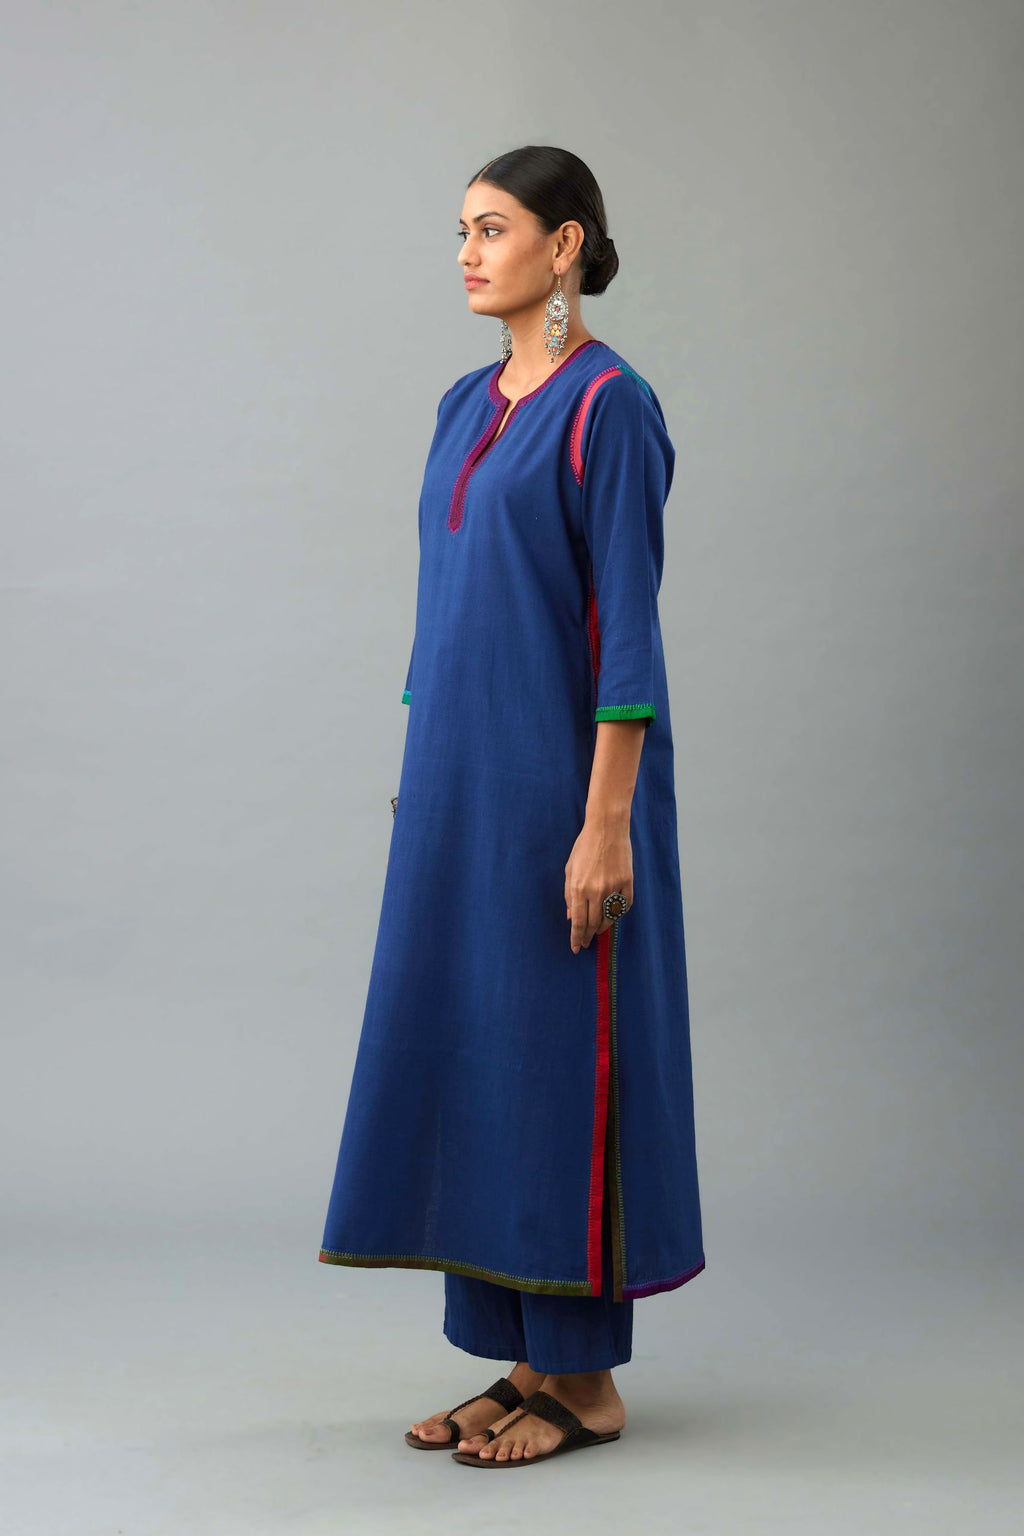 Blue handloom cotton straight kurta set with slit neck, multi colored silk facings and embroidery detail.